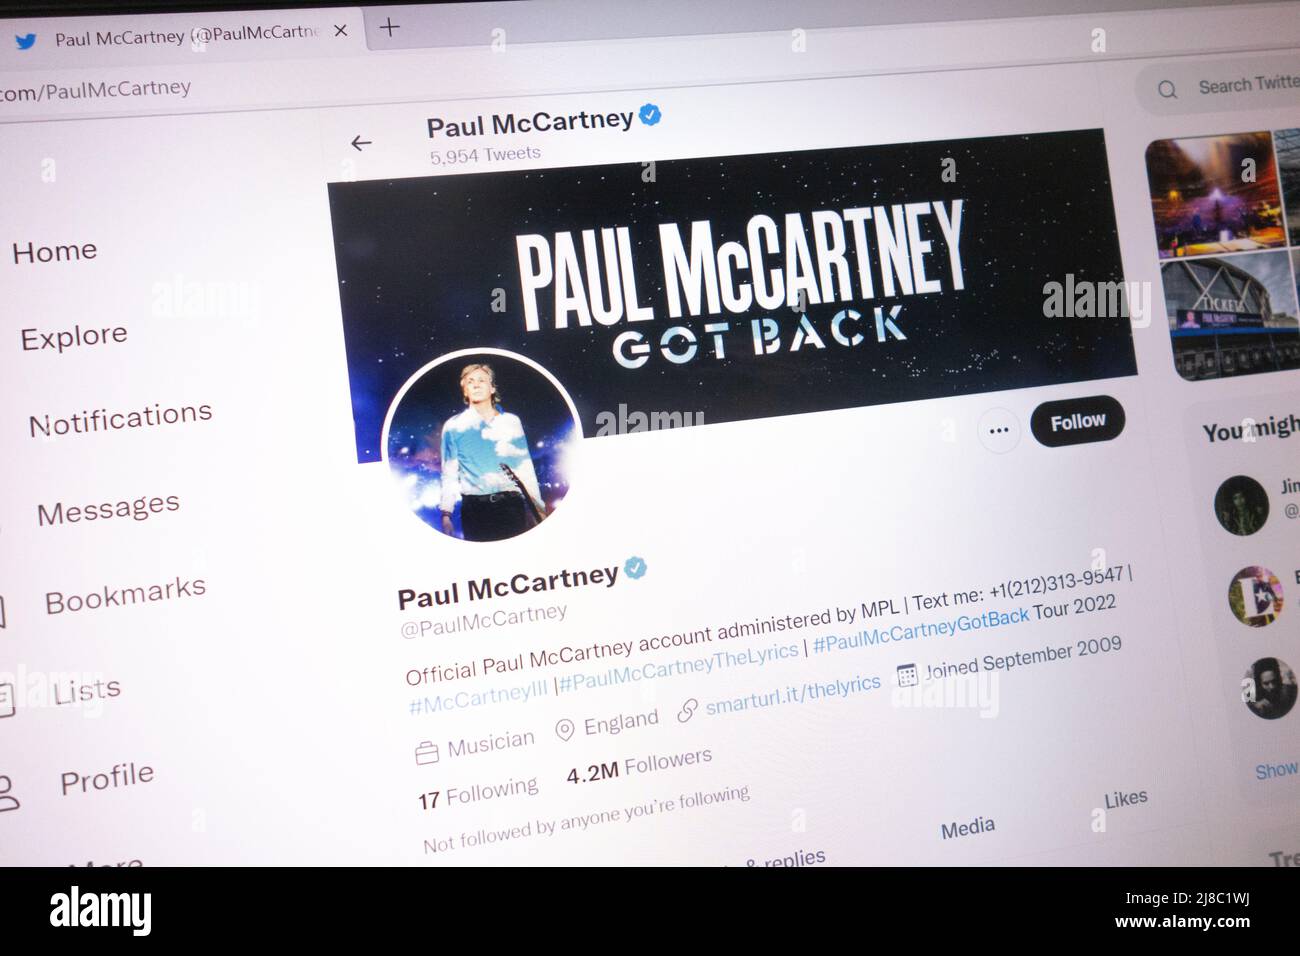 KONSKIE, POLAND - May 14, 2022: Paul McCartney official Twitter account displayed on laptop screen Stock Photo